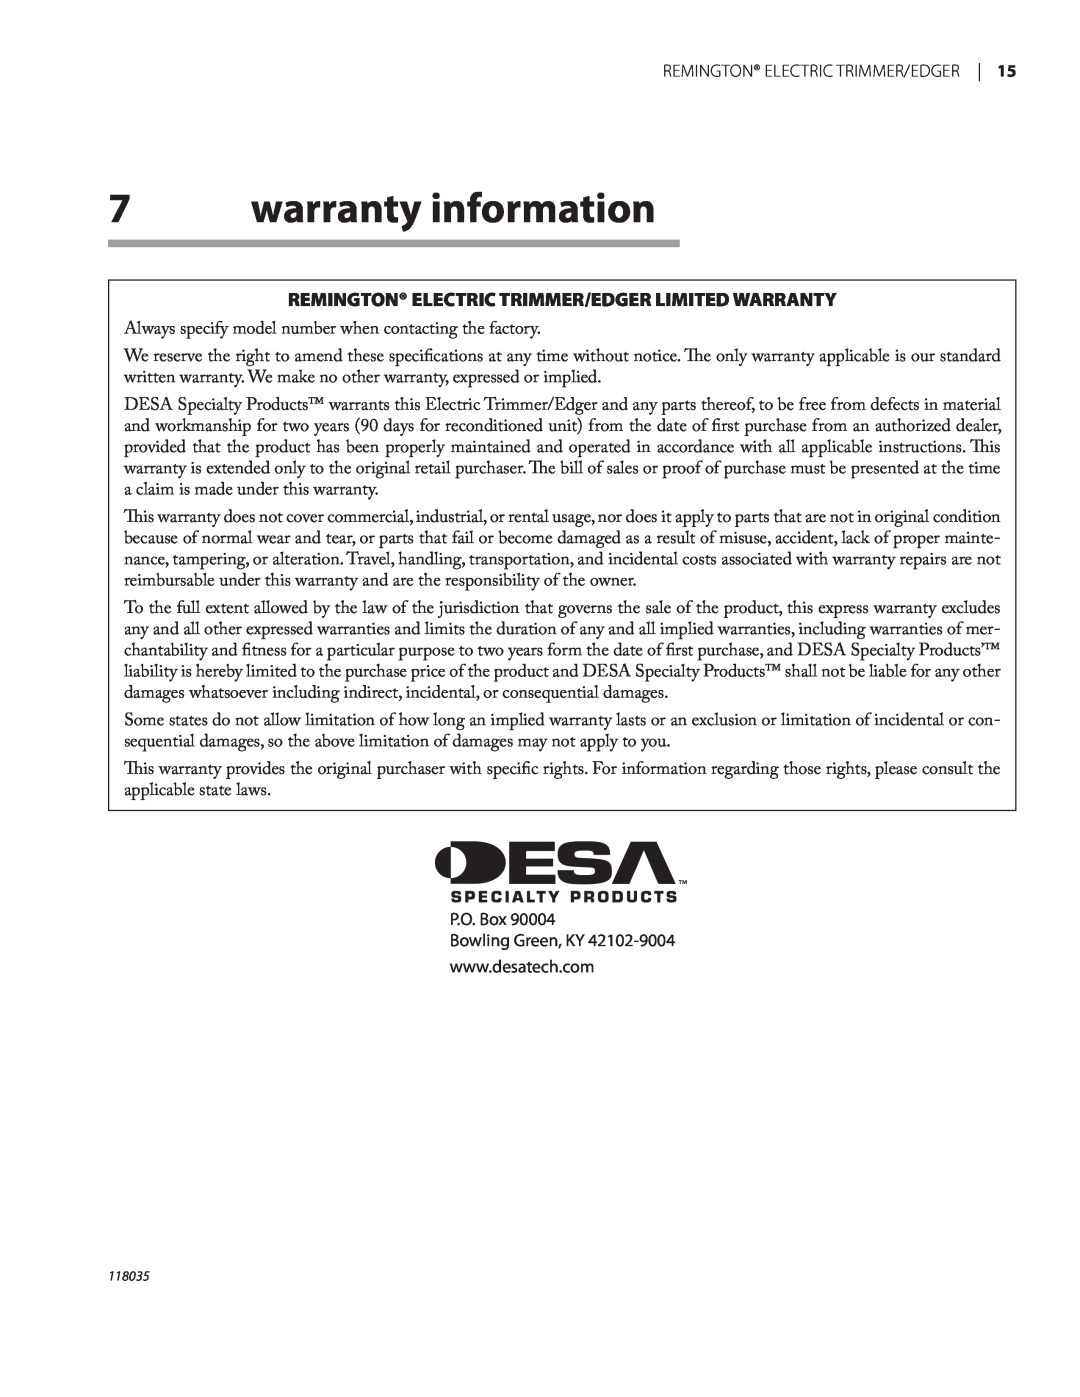 Remington Power Tools ST3812B, ST4514B owner manual warranty information, Remington Electric Trimmer/Edger Limited Warranty 